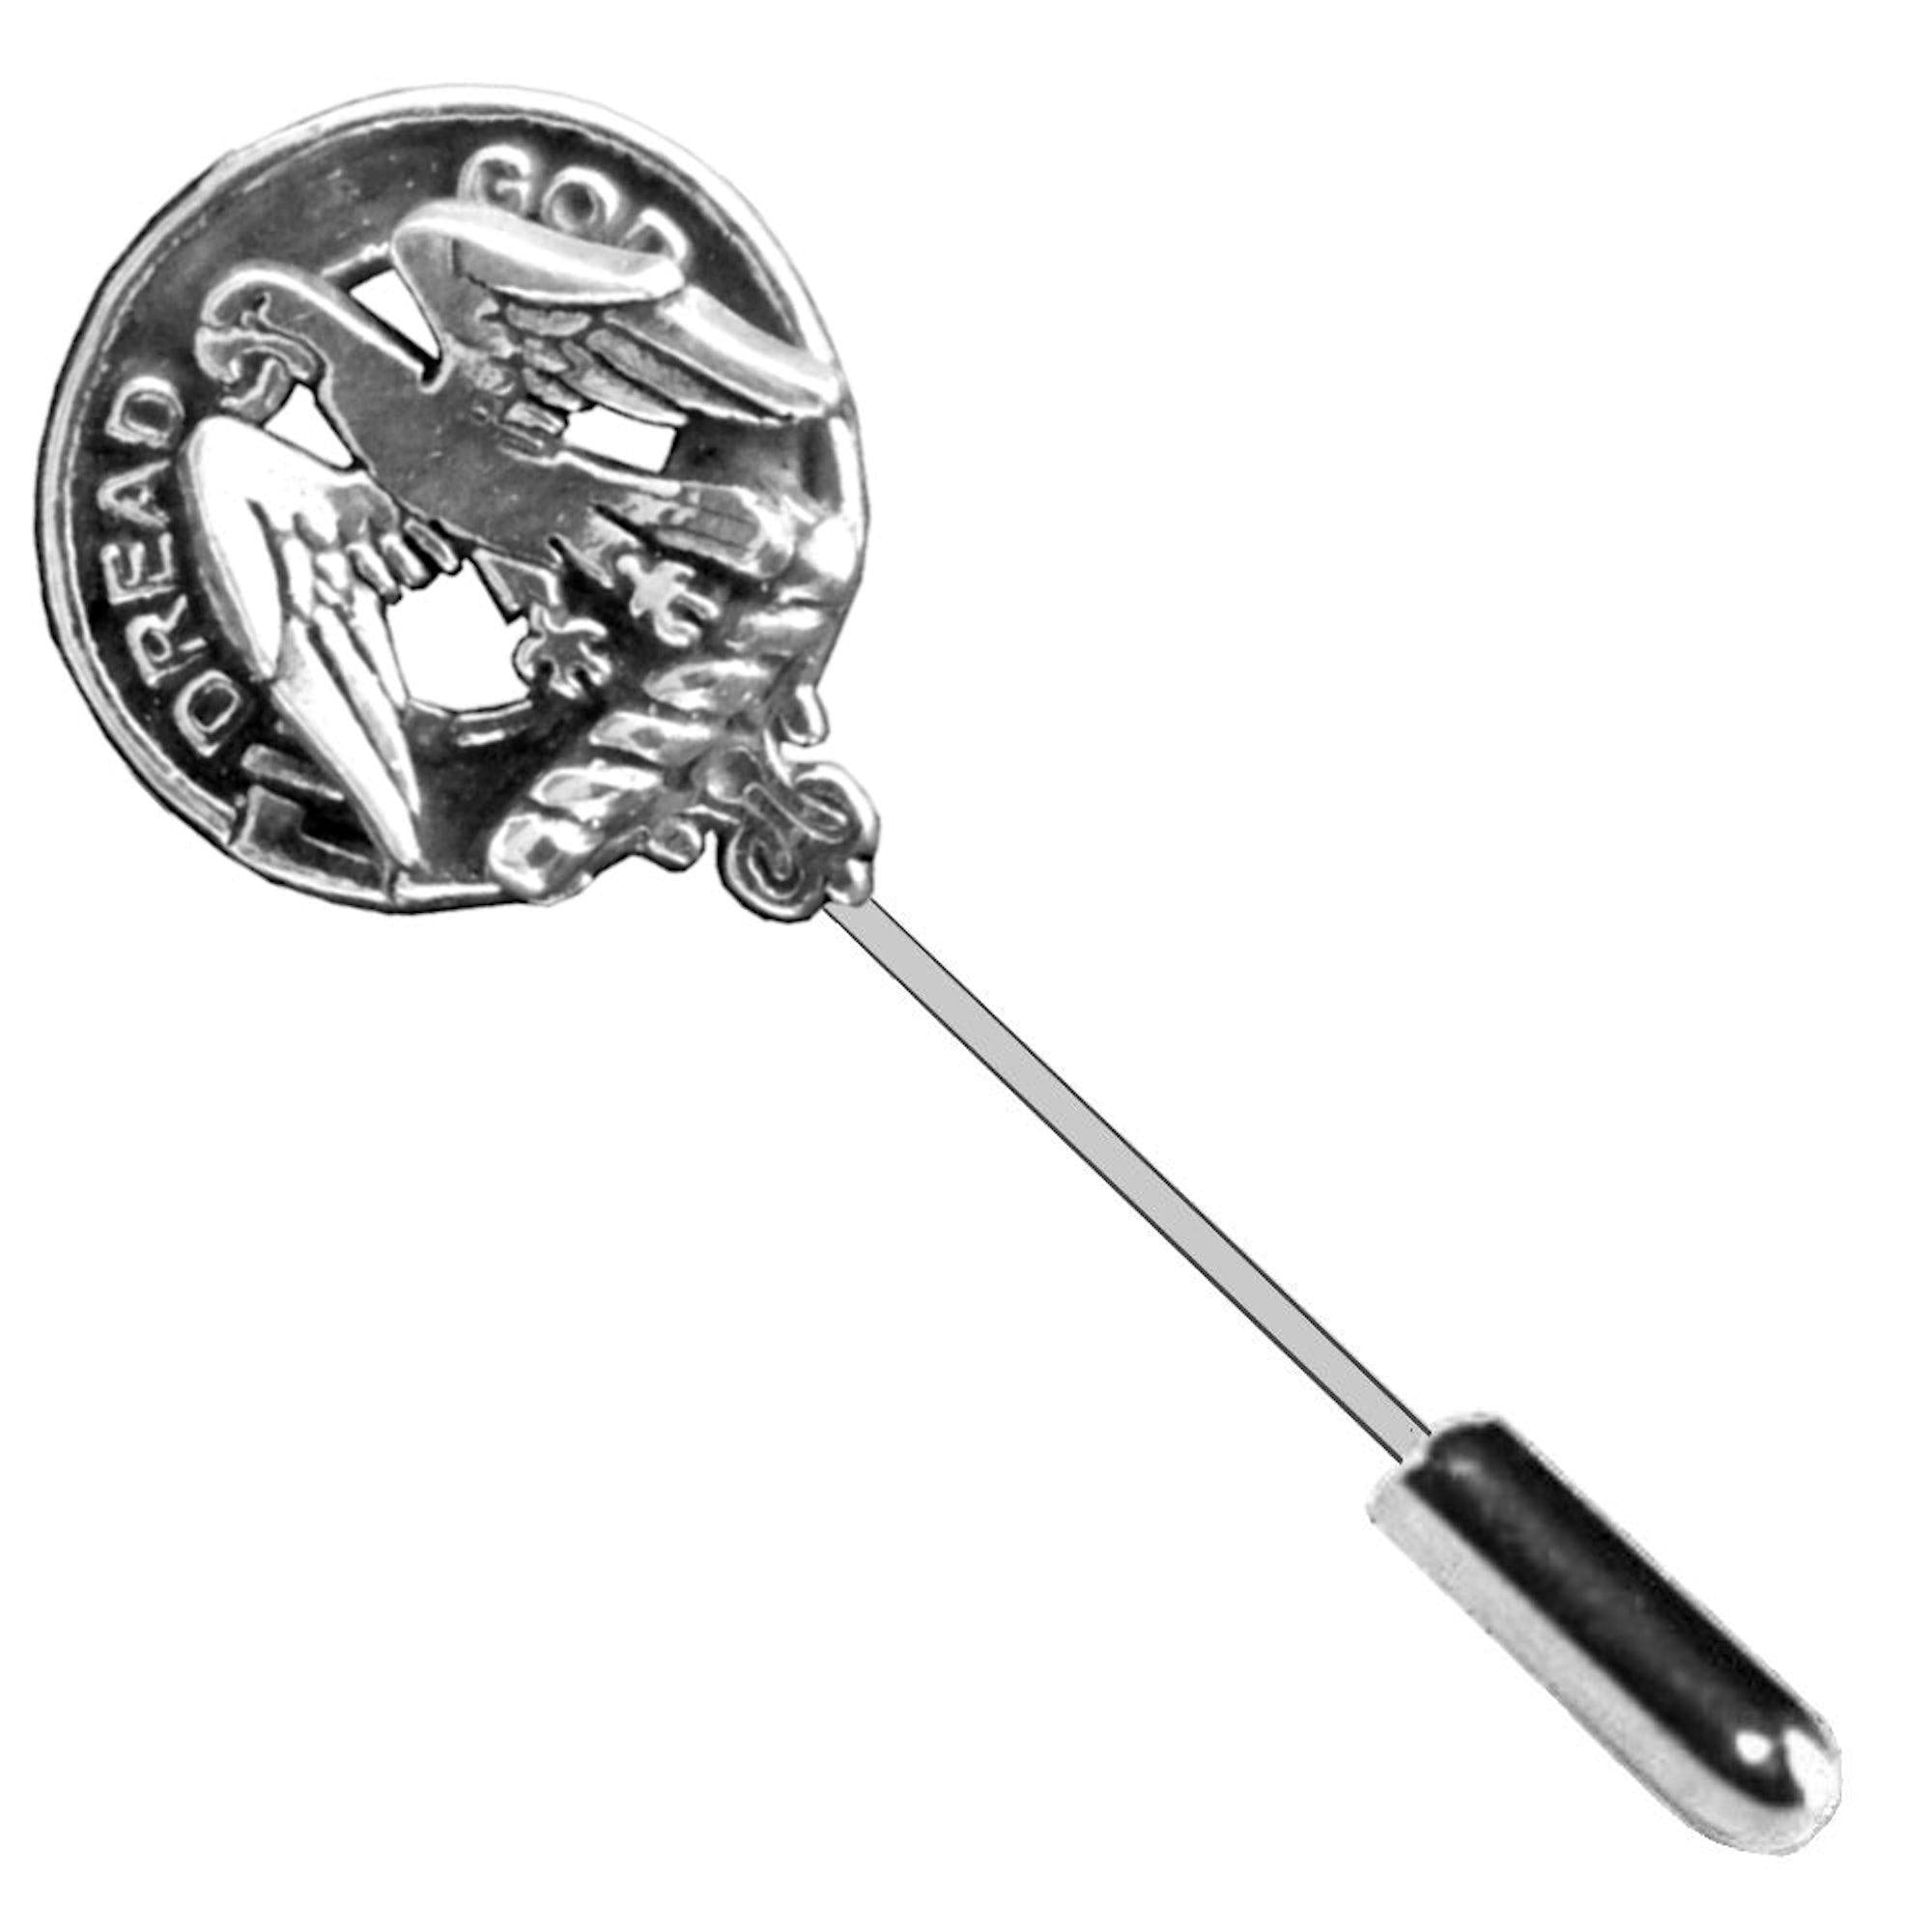 Munro Clan Crest Stick or Cravat pin, Sterling Silver